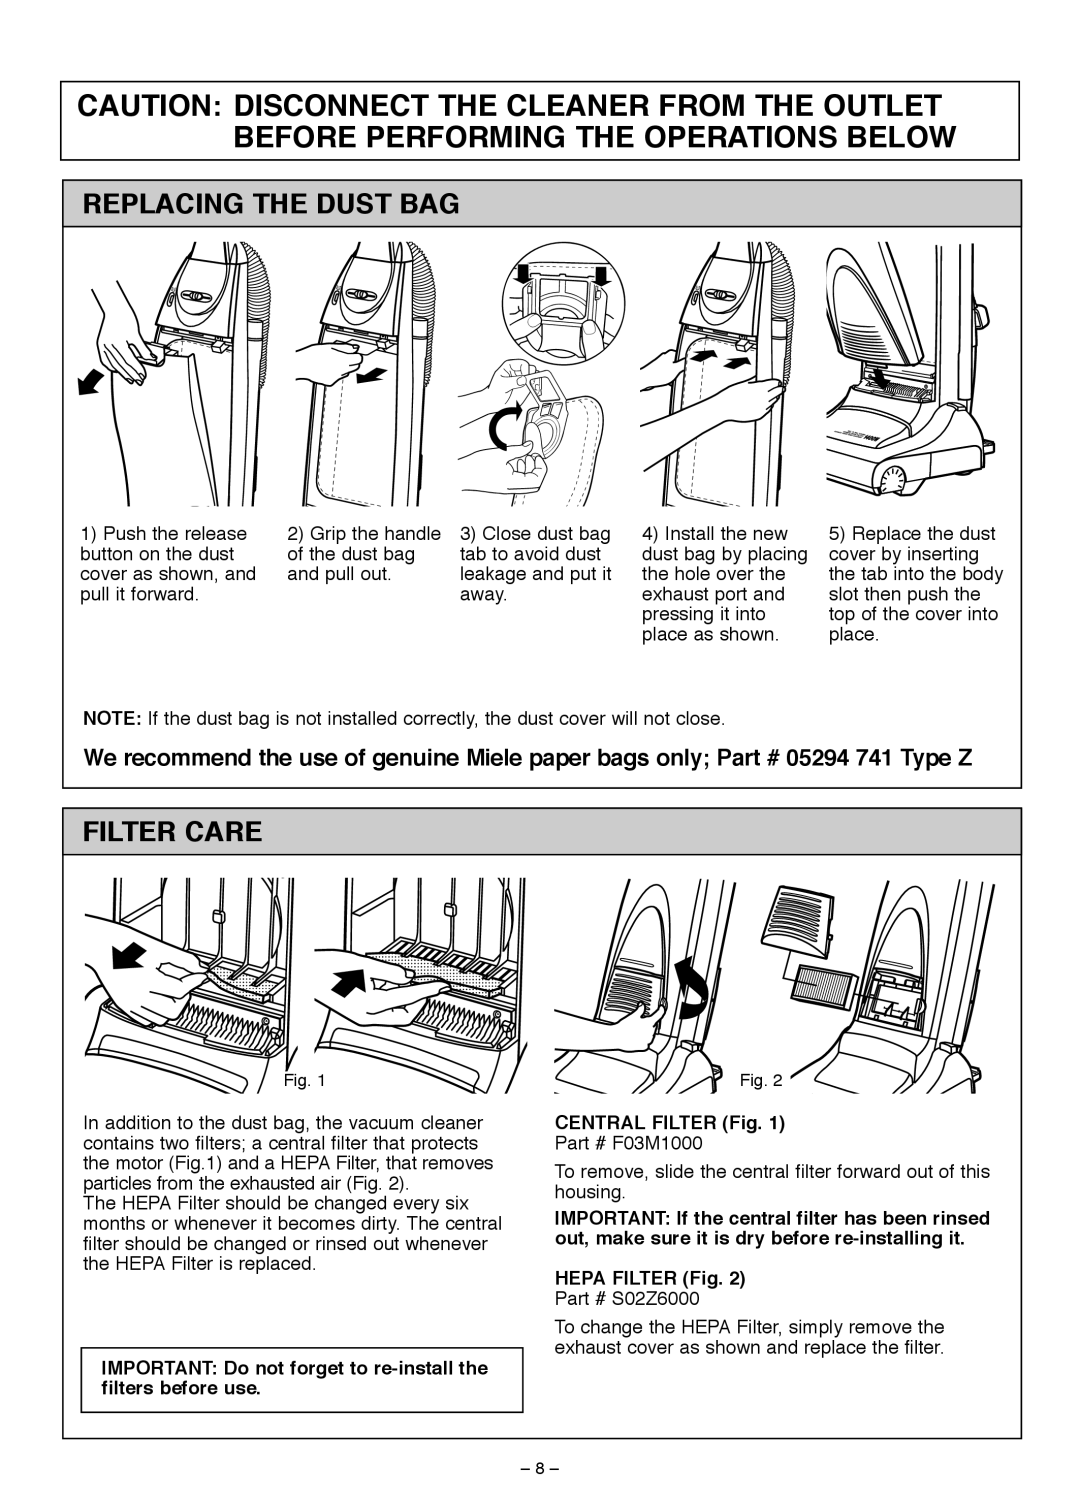 Miele S185 important safety instructions Replacing The Dust Bag, Filter Care, CENTRAL FILTER Fig, HEPA FILTER Fig 